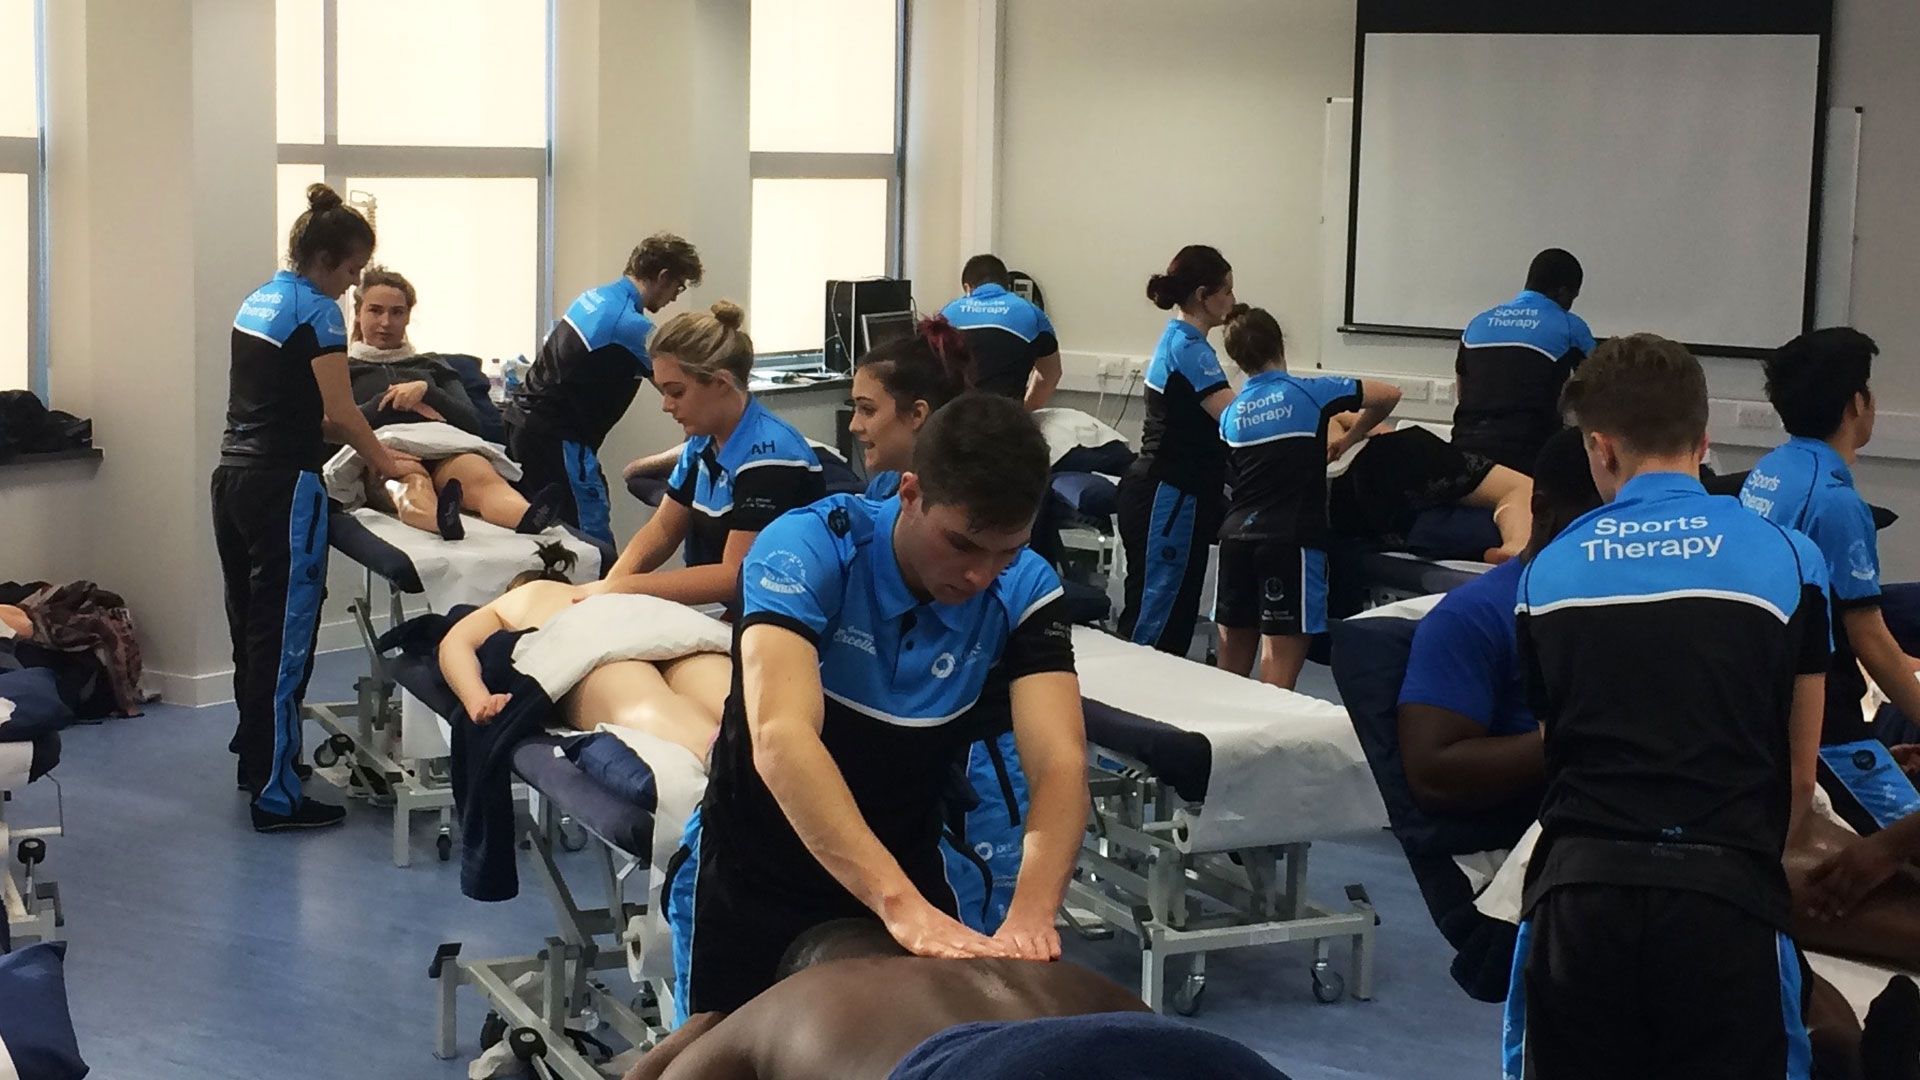 Sports Therapy students practicing massage at lab